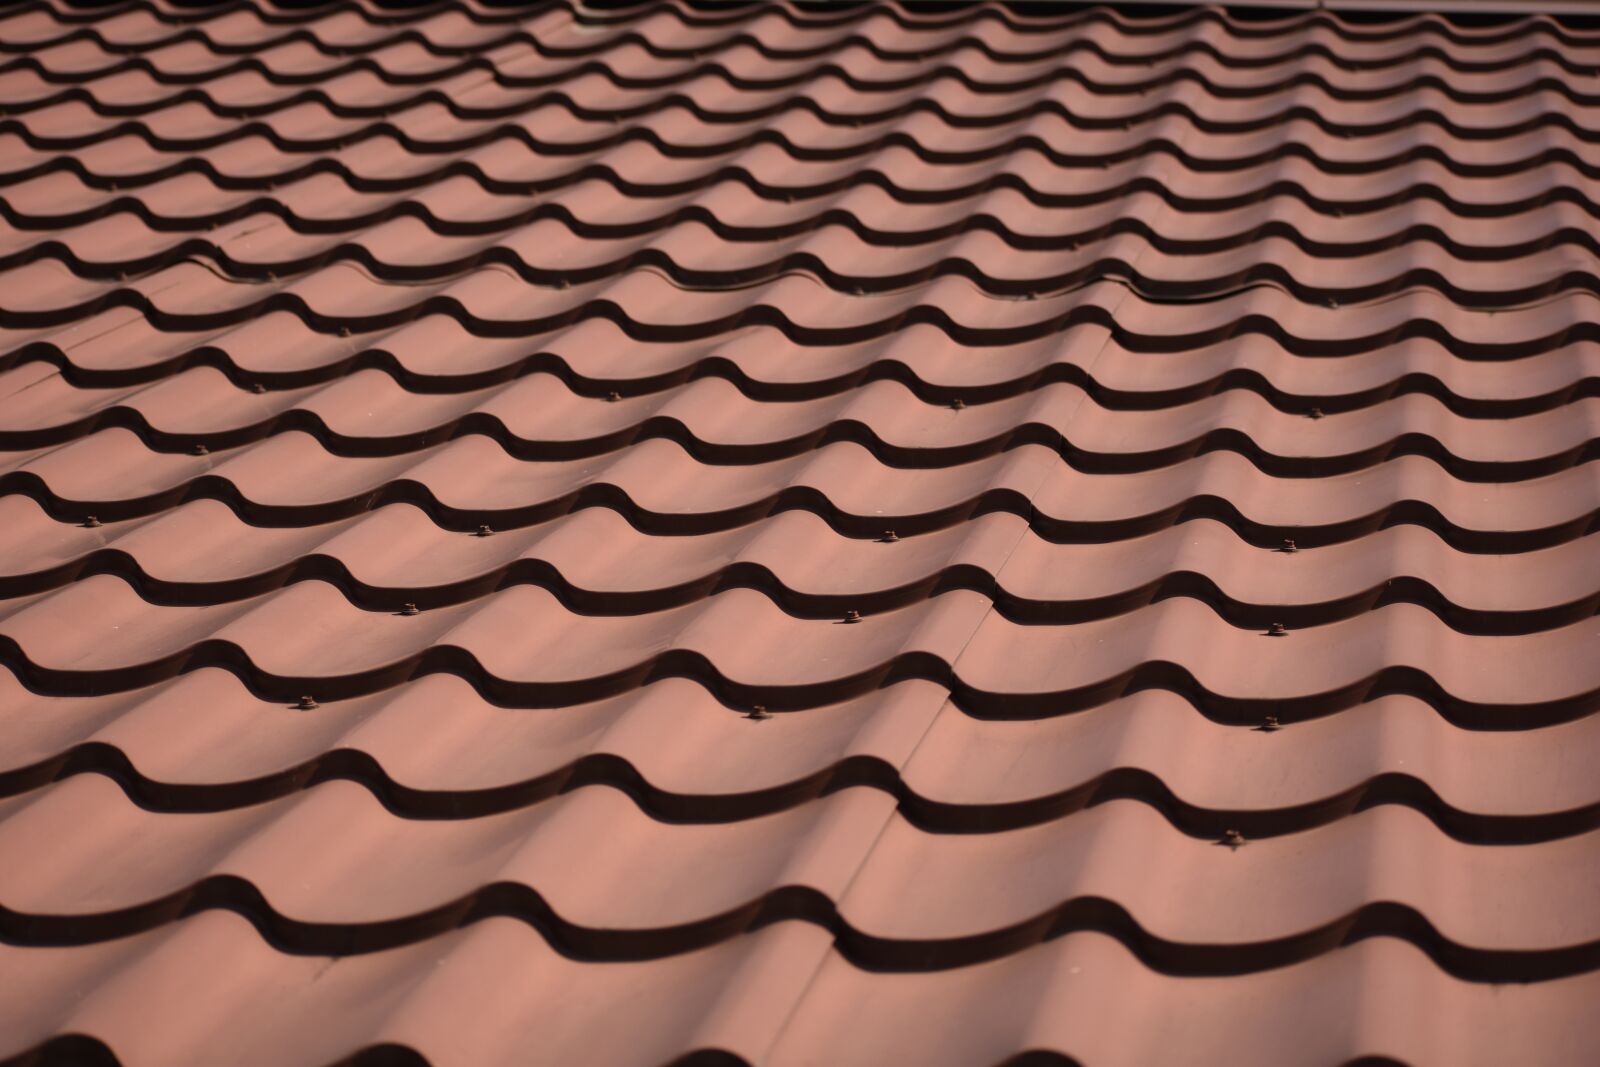 Nikon D3400 sample photo. Roof, roof tiles, clay photography